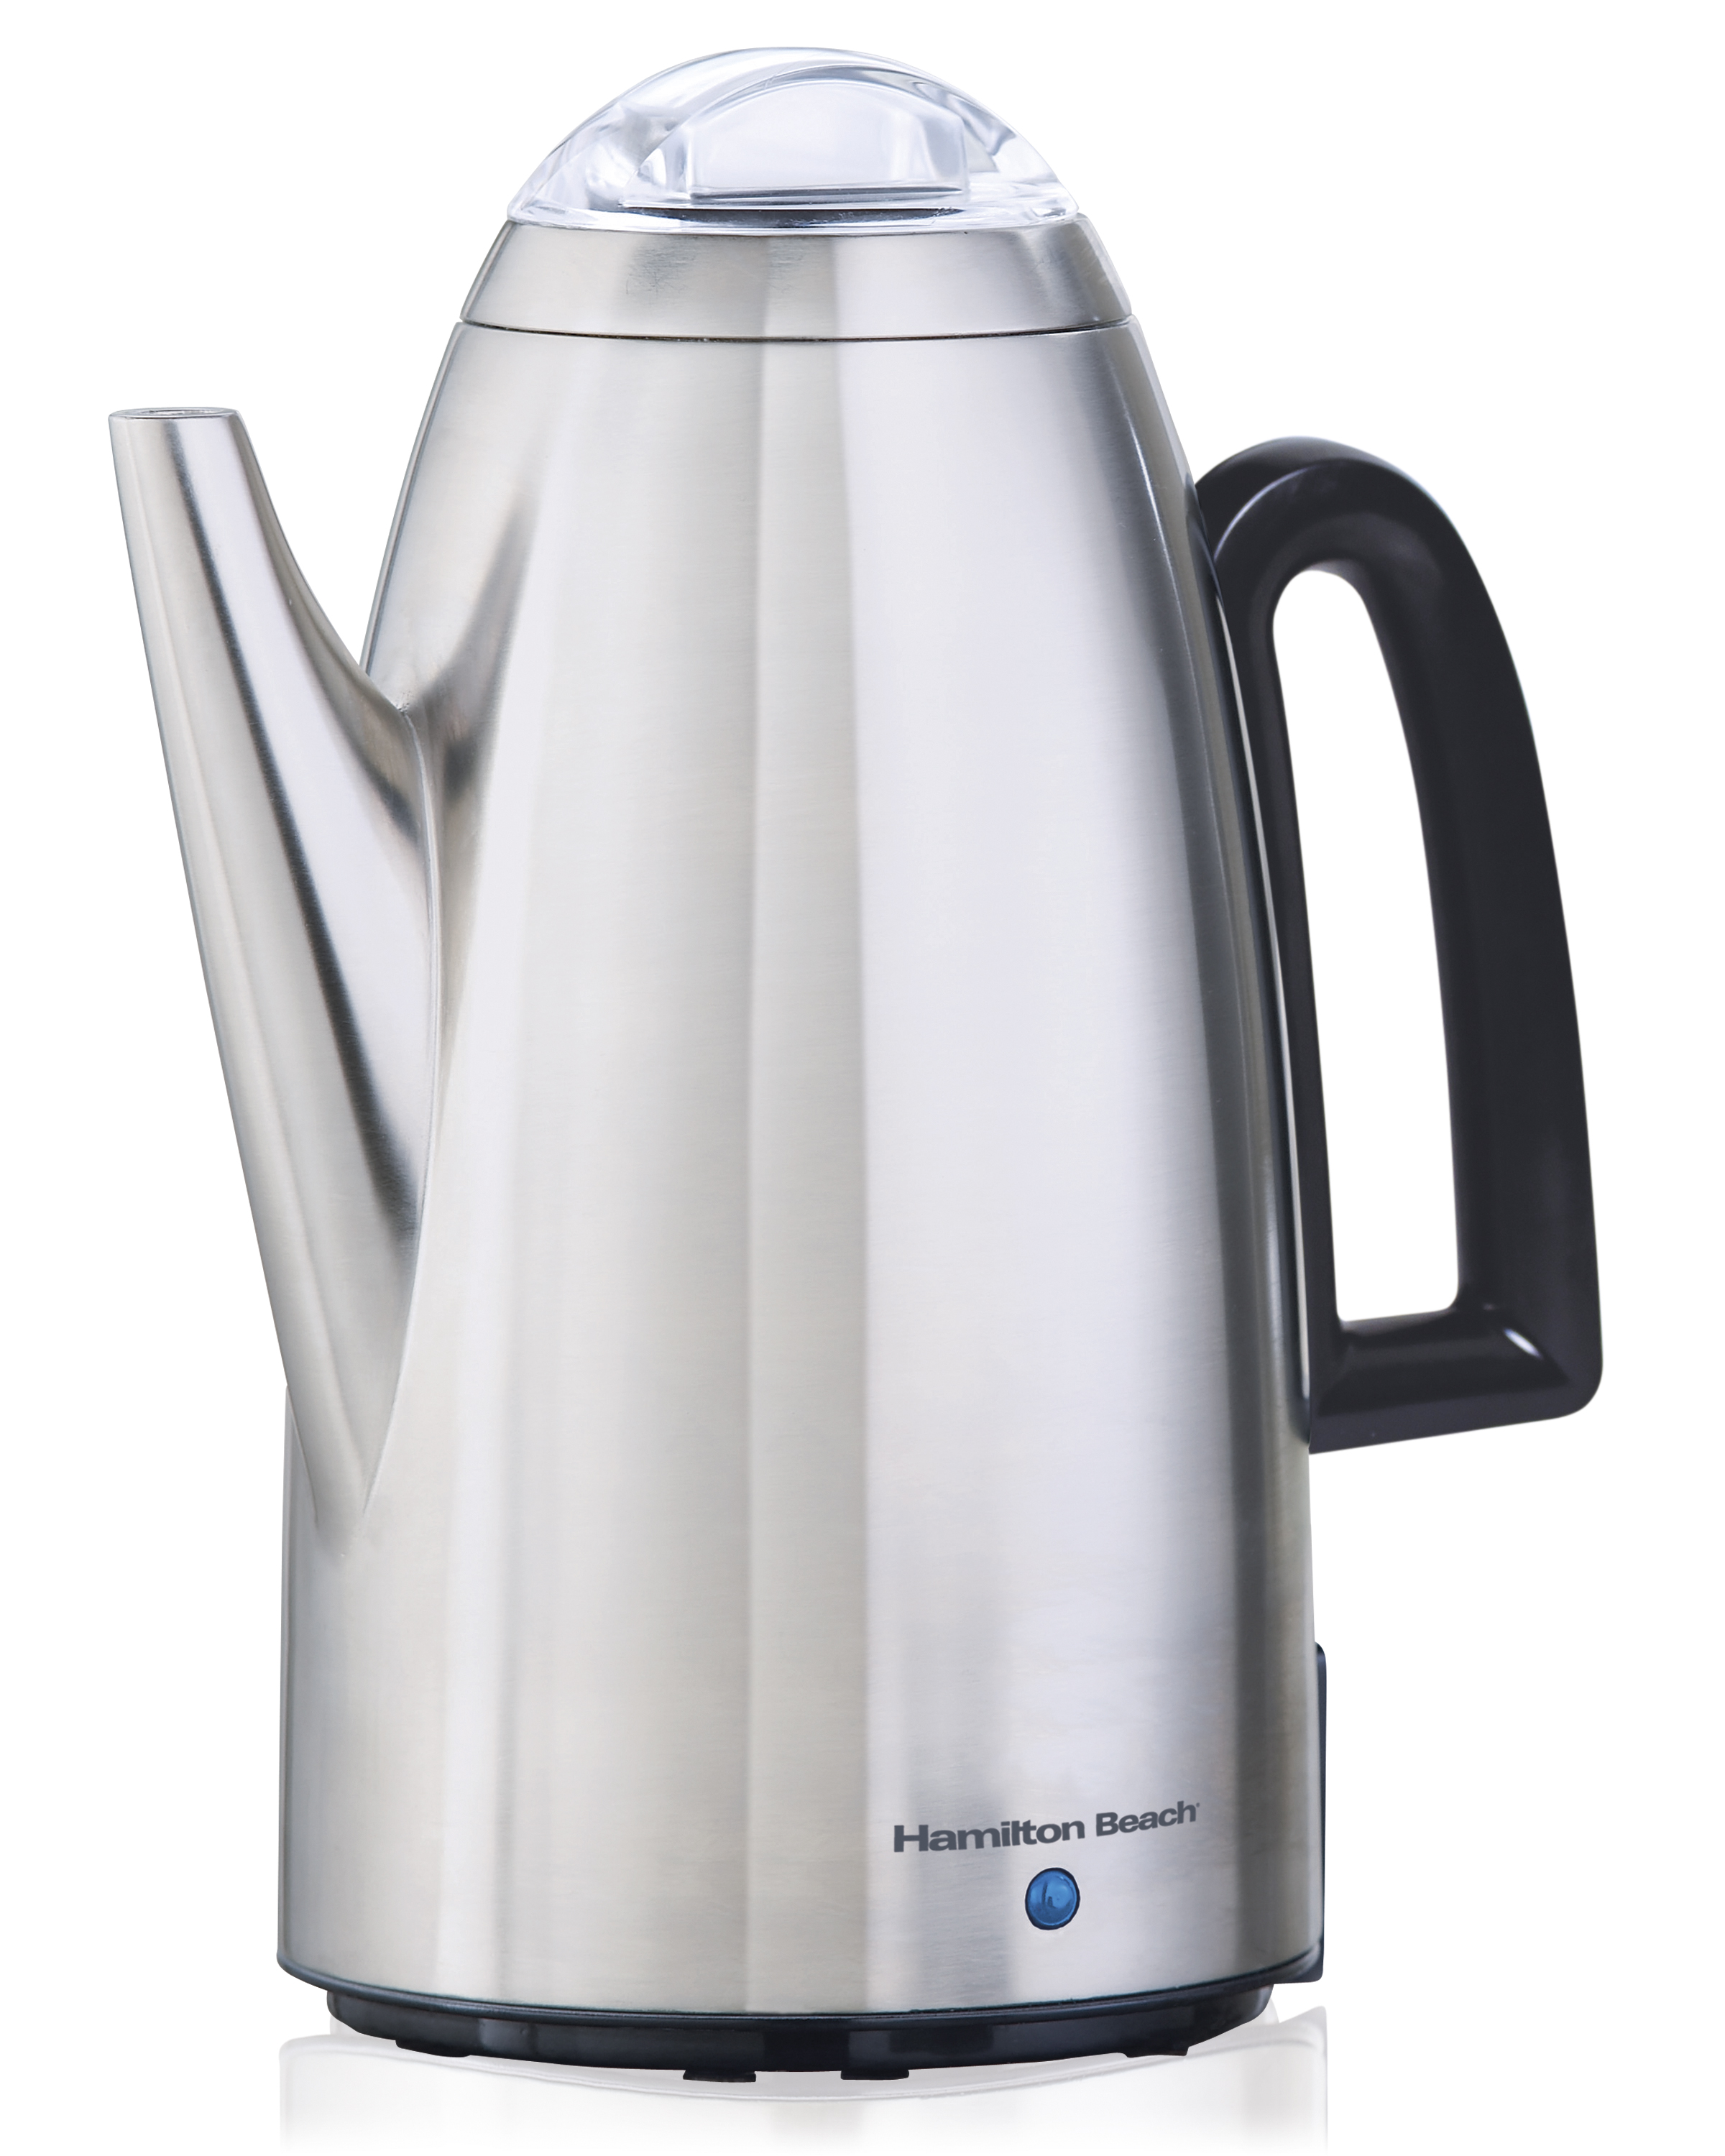 Hamilton Beach Stainless Steel Electric Coffee Percolator, 12 Cups or 3 Quarts, 40614 - image 1 of 6